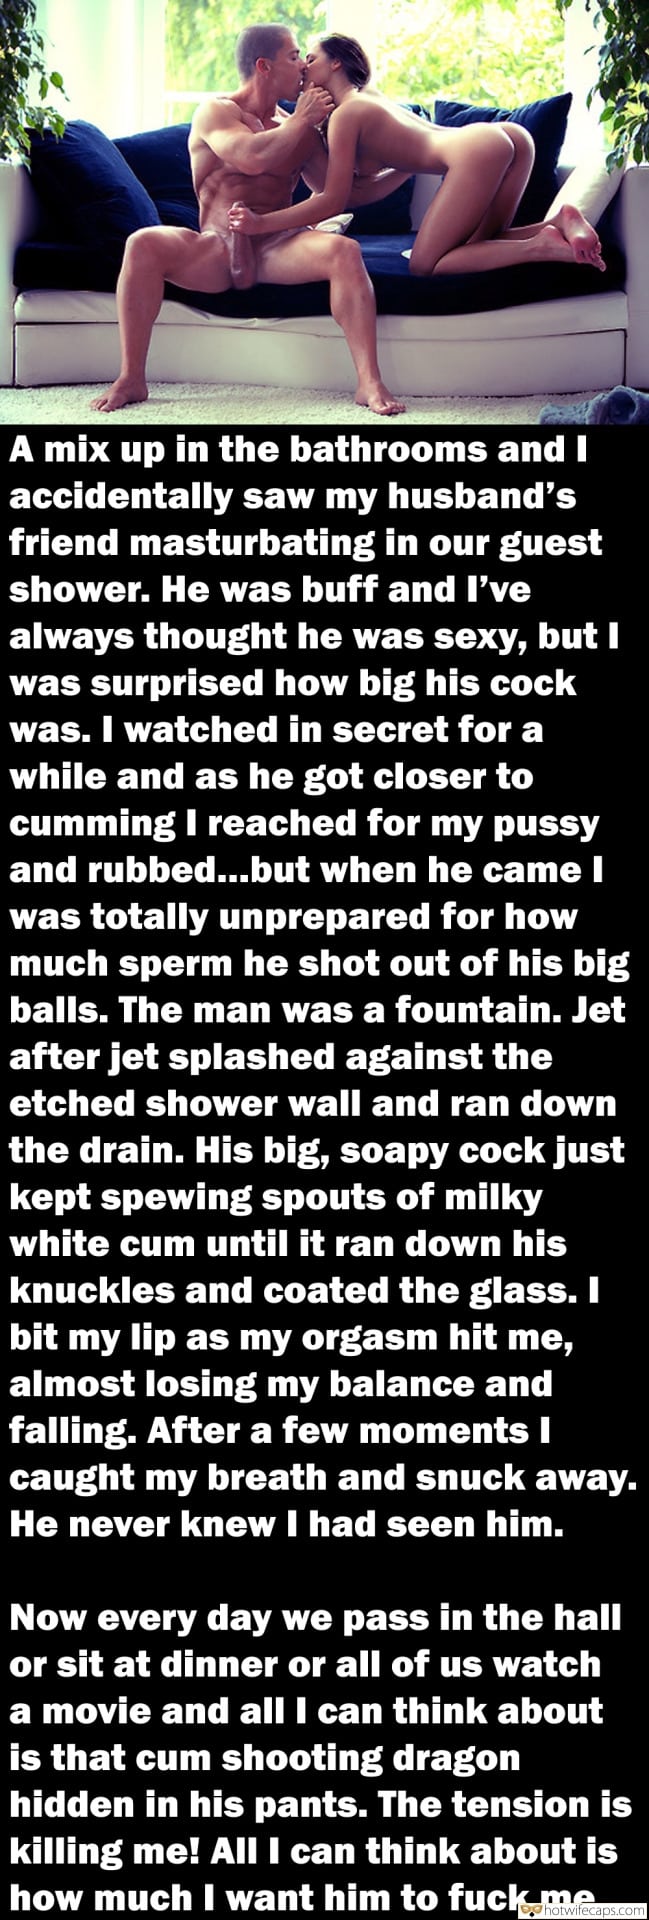 Cuckold Stories  hotwife caption: A mix up in the bathrooms and I accidentally saw my husband’s friend masturbating in our guest shower. He was buff and l’ve always thought he was sexy, but I was surprised how big his cock was. I watched in...